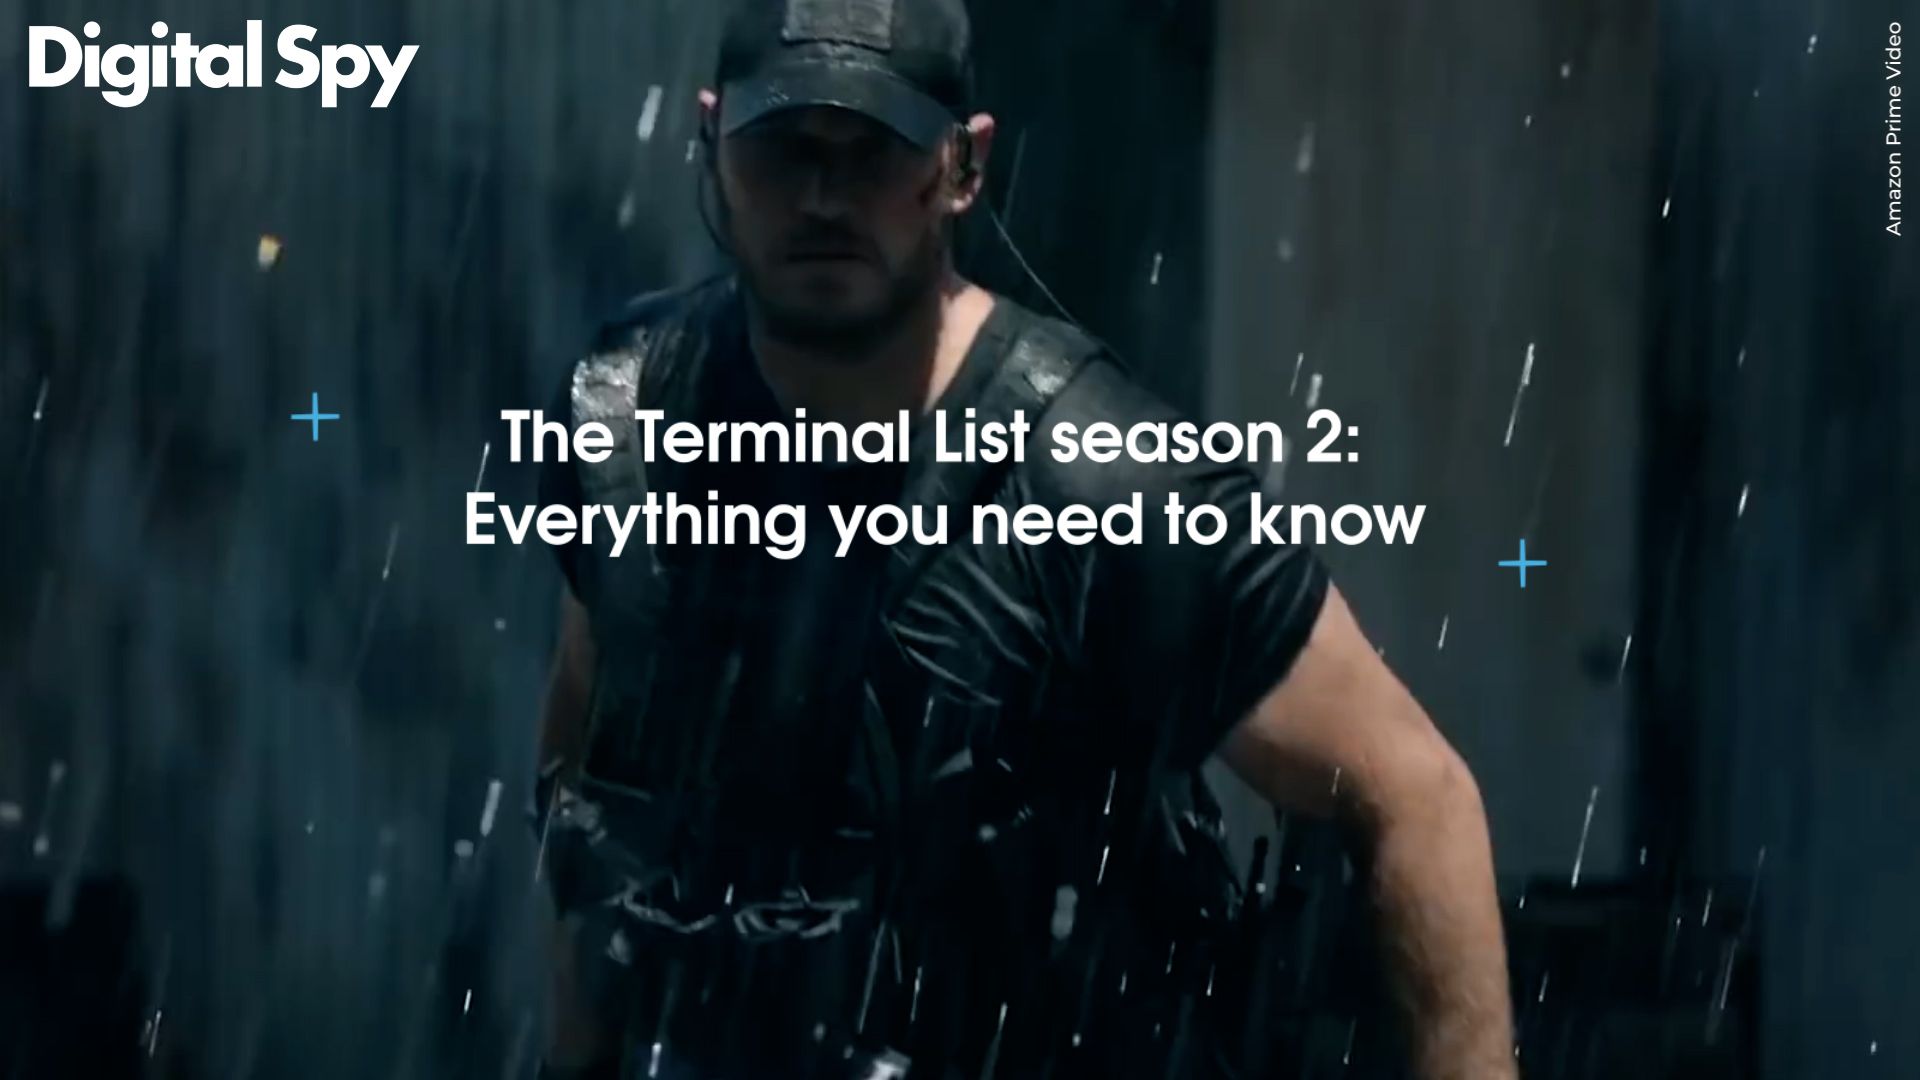 The Terminal List season 2: Tentative release date and everything